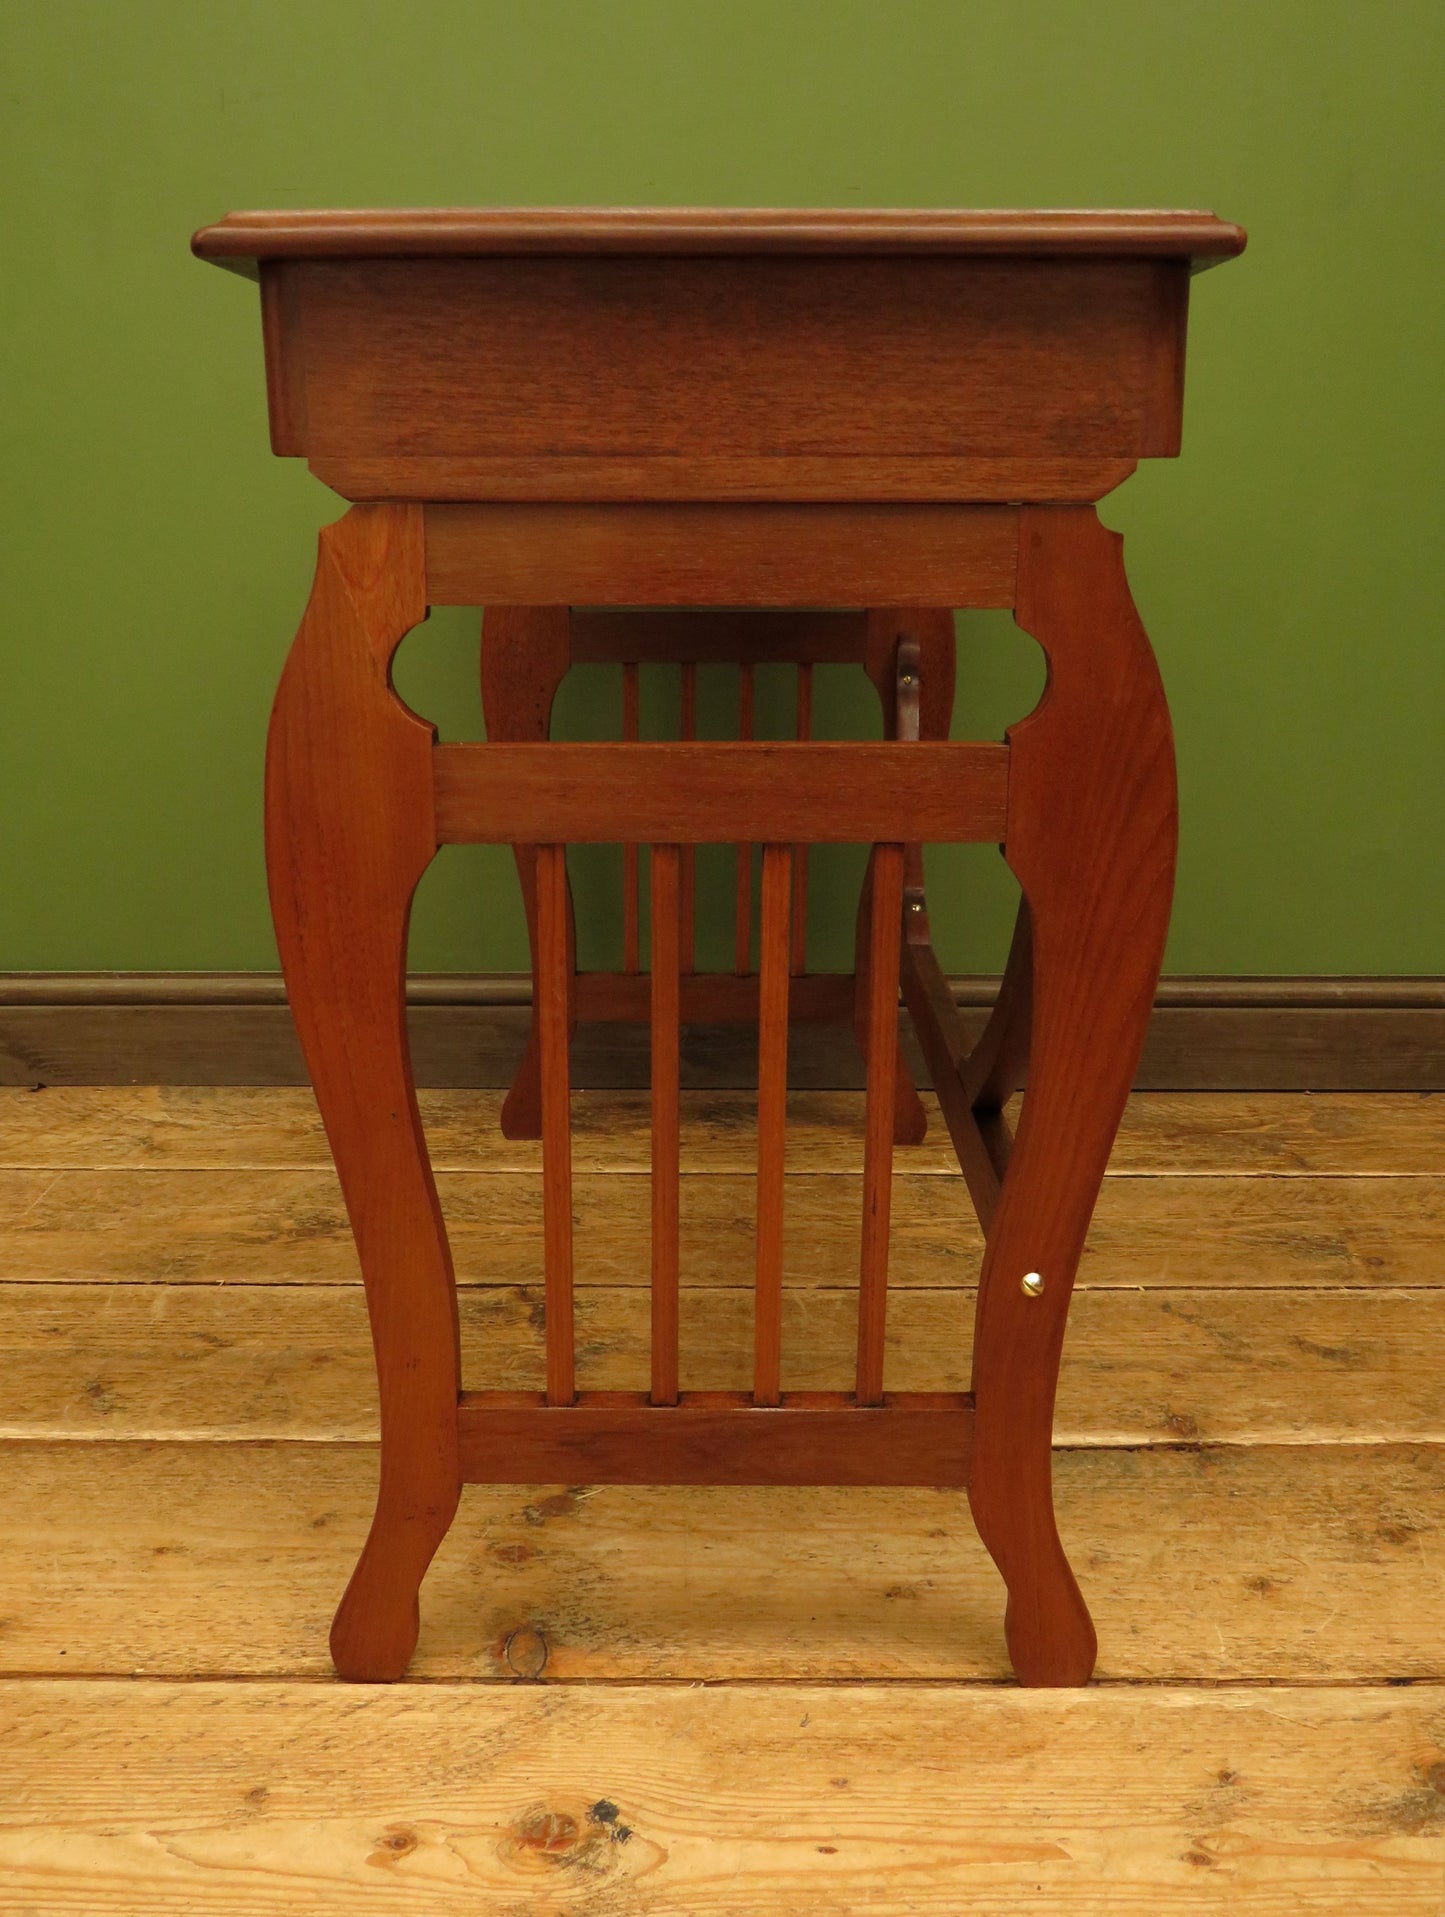 A restored Folding Campaign Writing Table with Banks & Rushton Locks